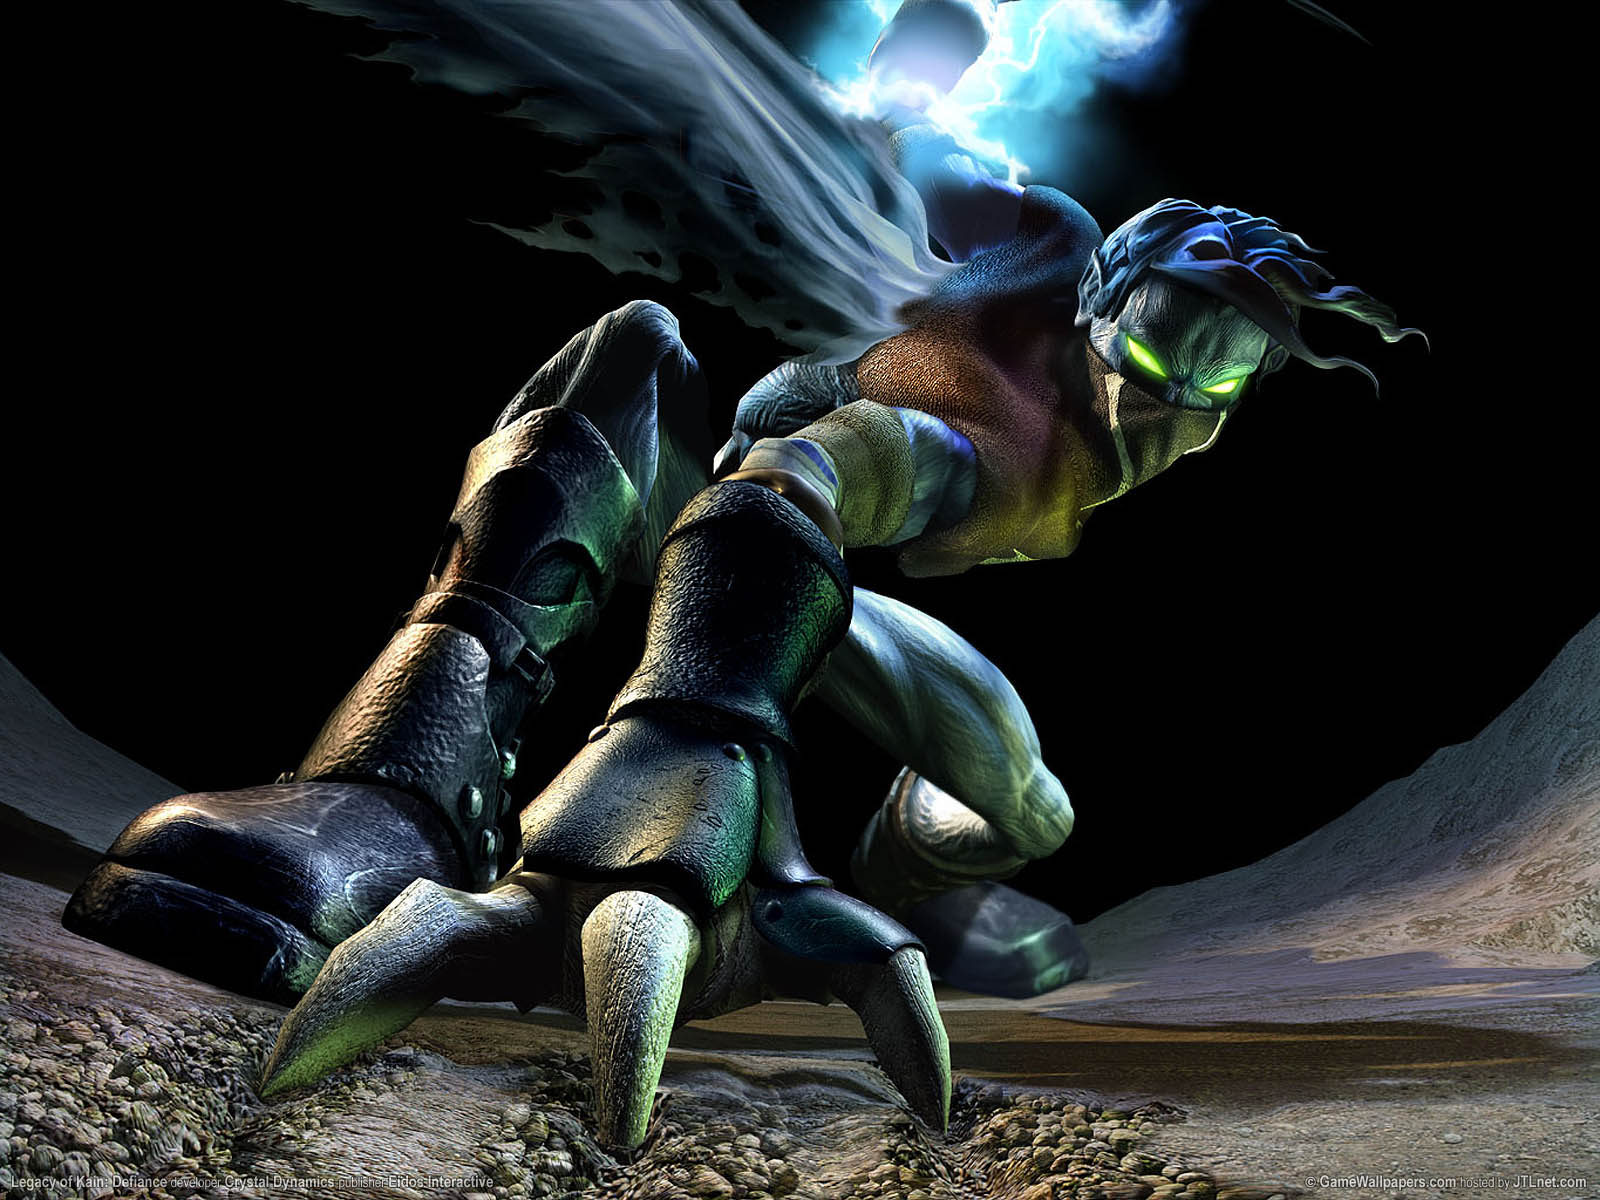 Legacy of Kain%25253A Defiance wallpaper 03 1600x1200